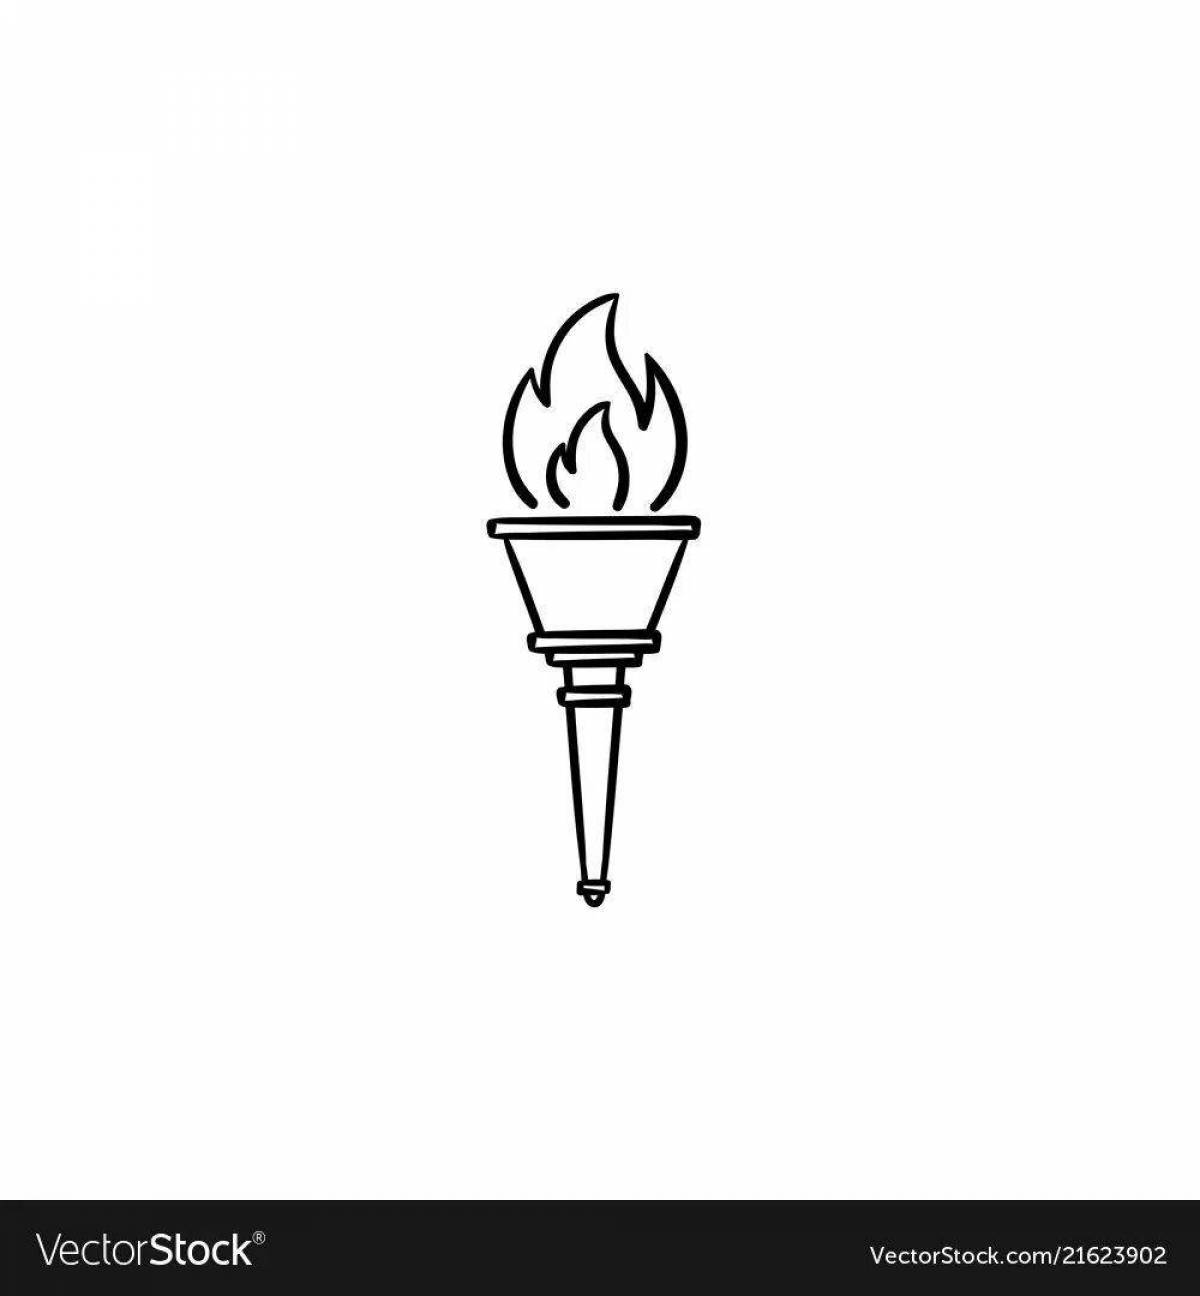 Attractive torch coloring book for kids